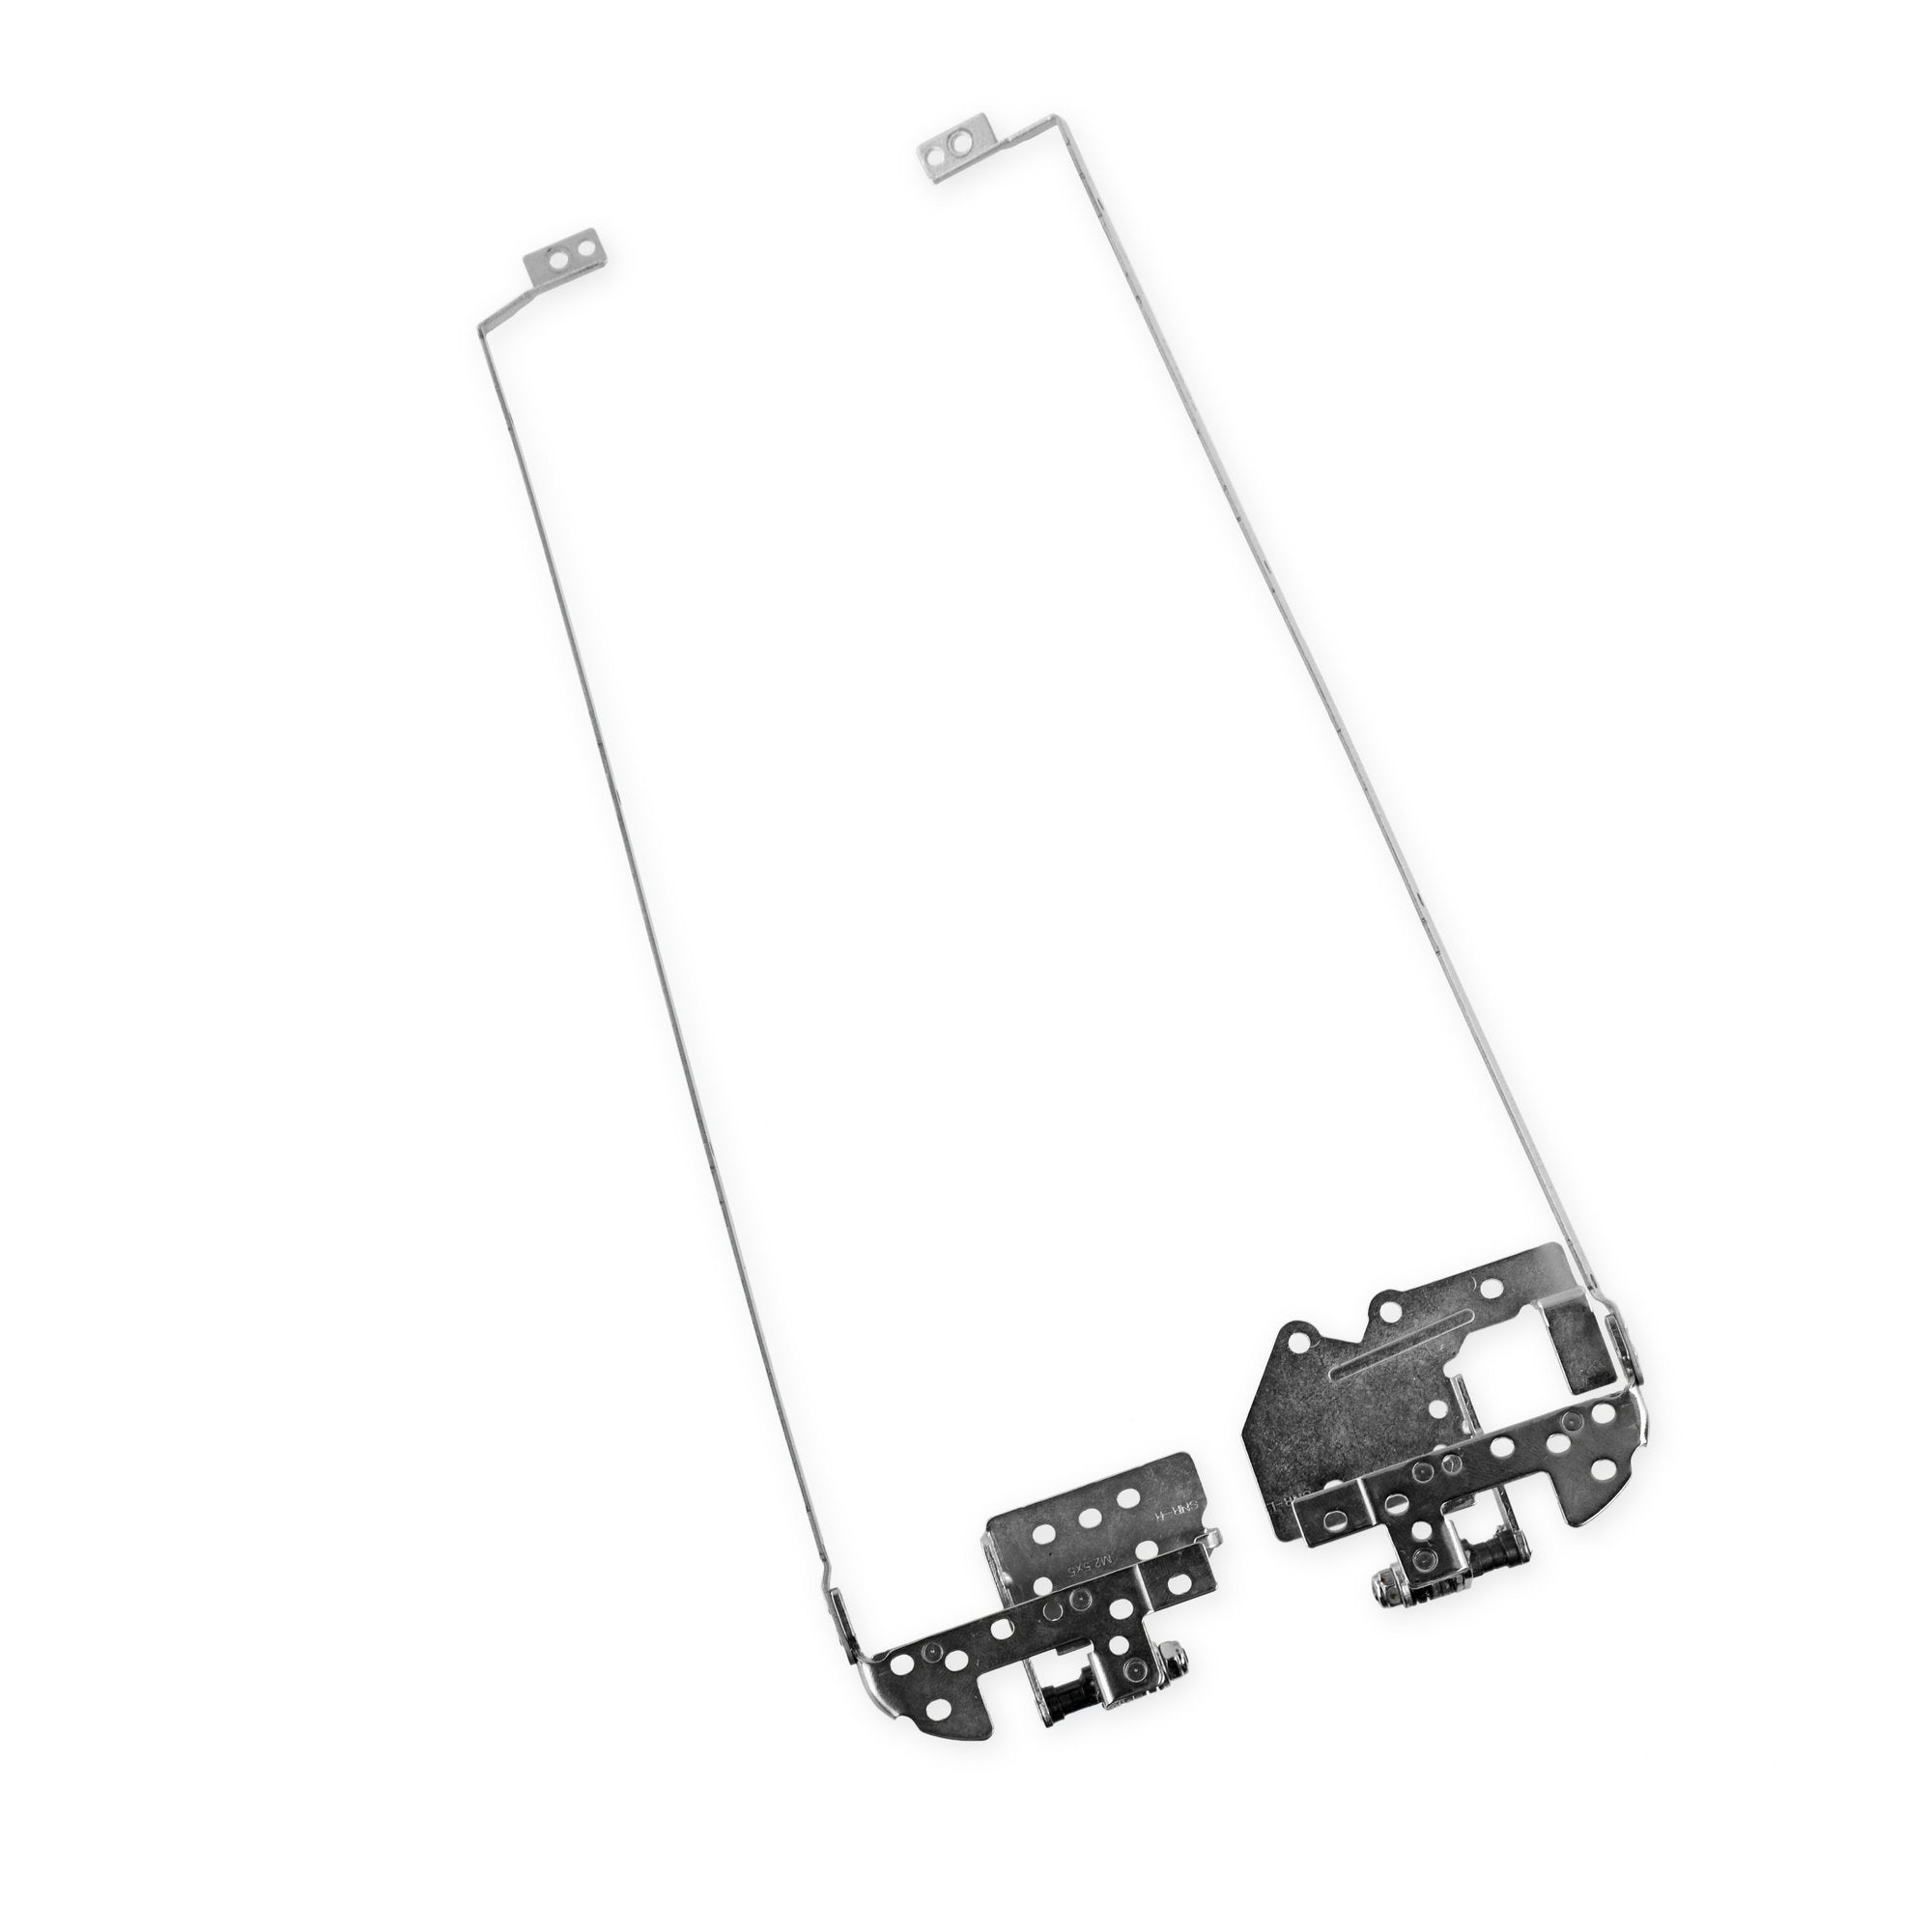 Dell Inspiron 17R (5721) Hinges